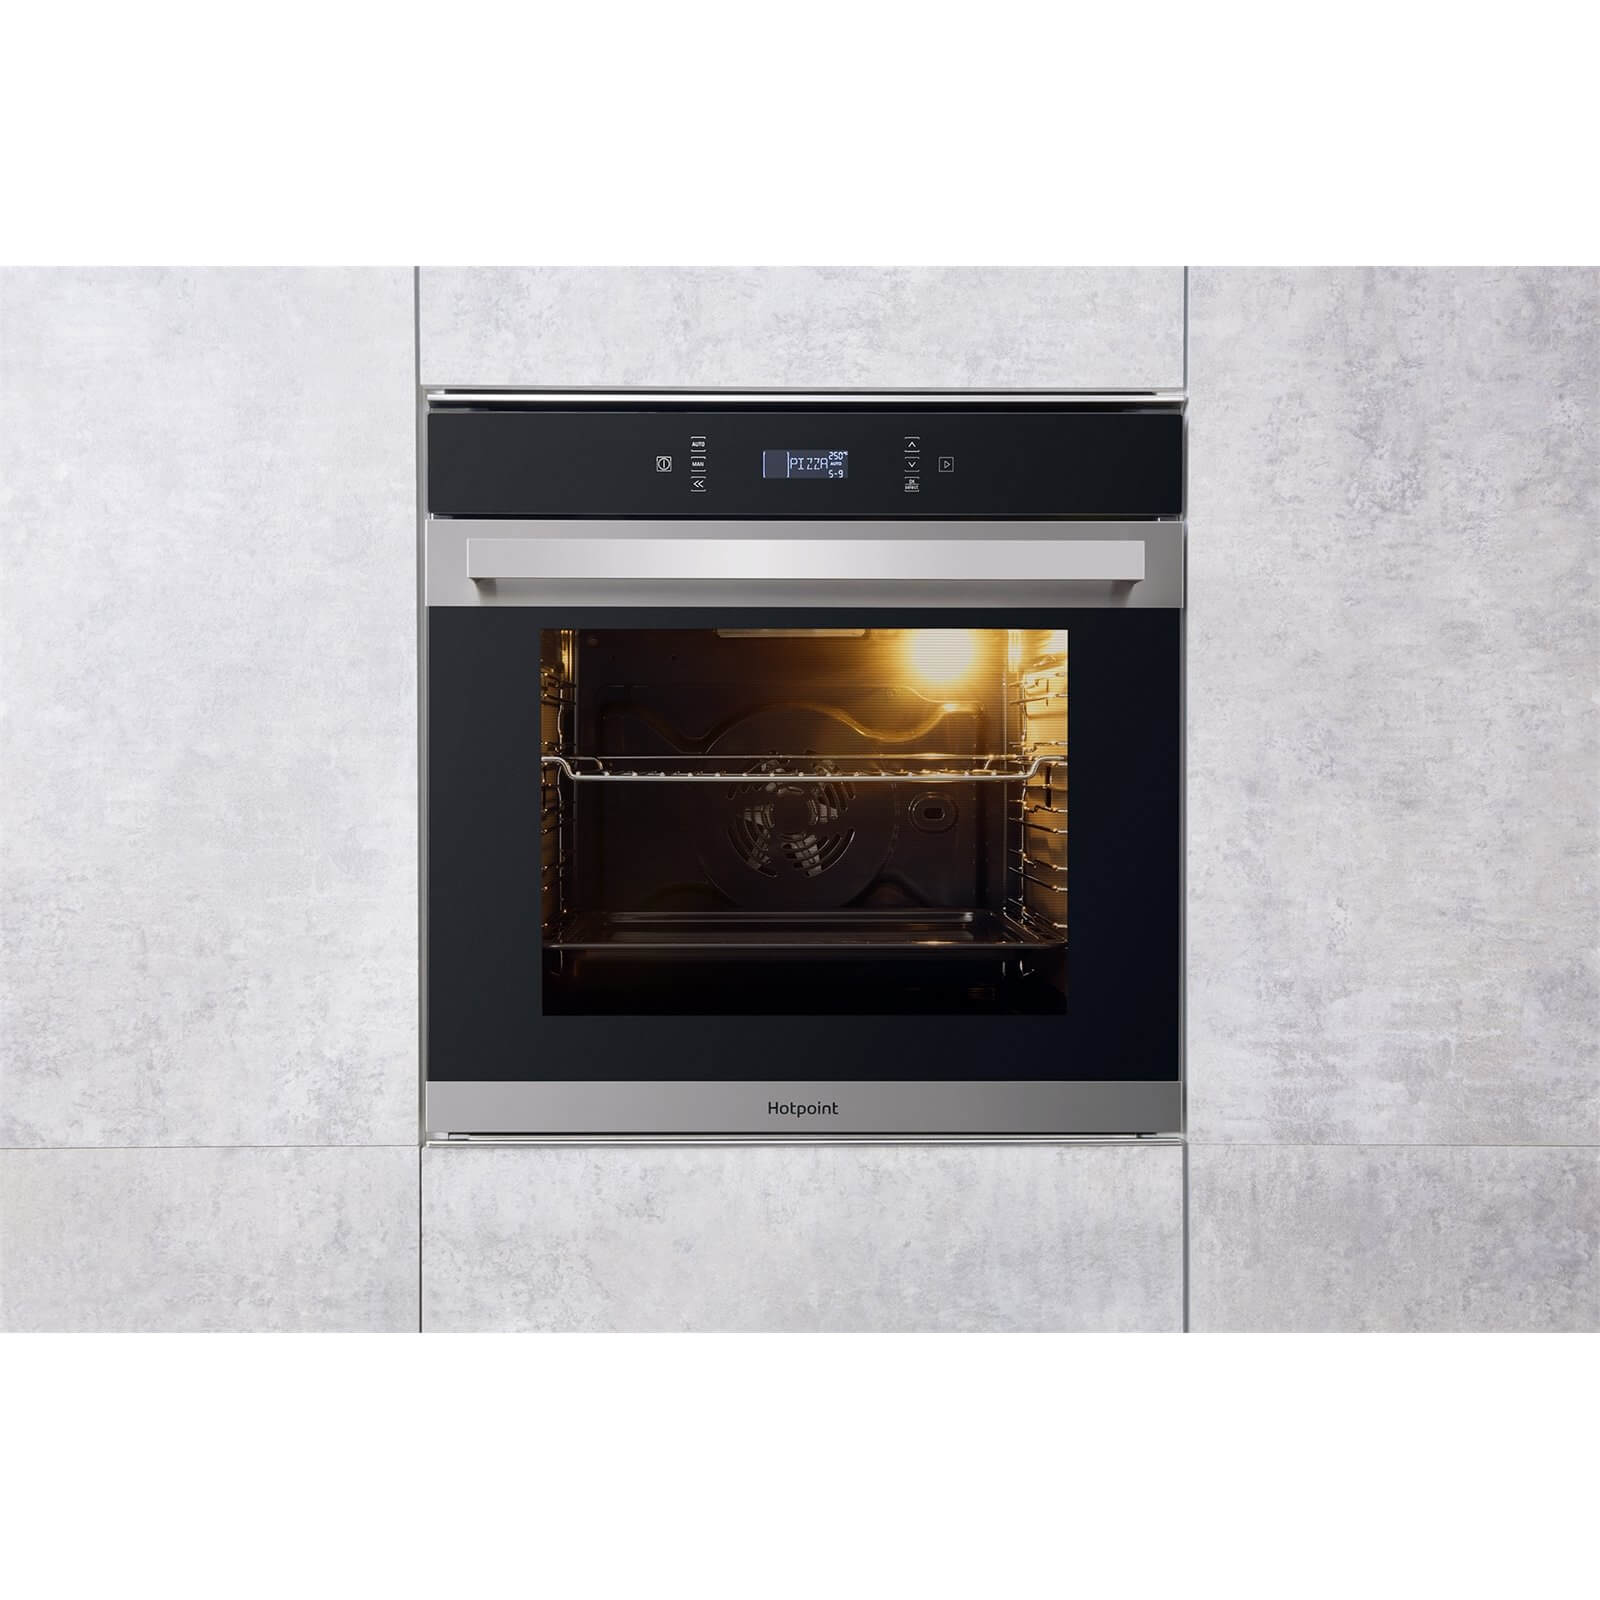 Hotpoint Class 7 SI7 871 SC IX Built-in Electric Oven - Stainless Steel